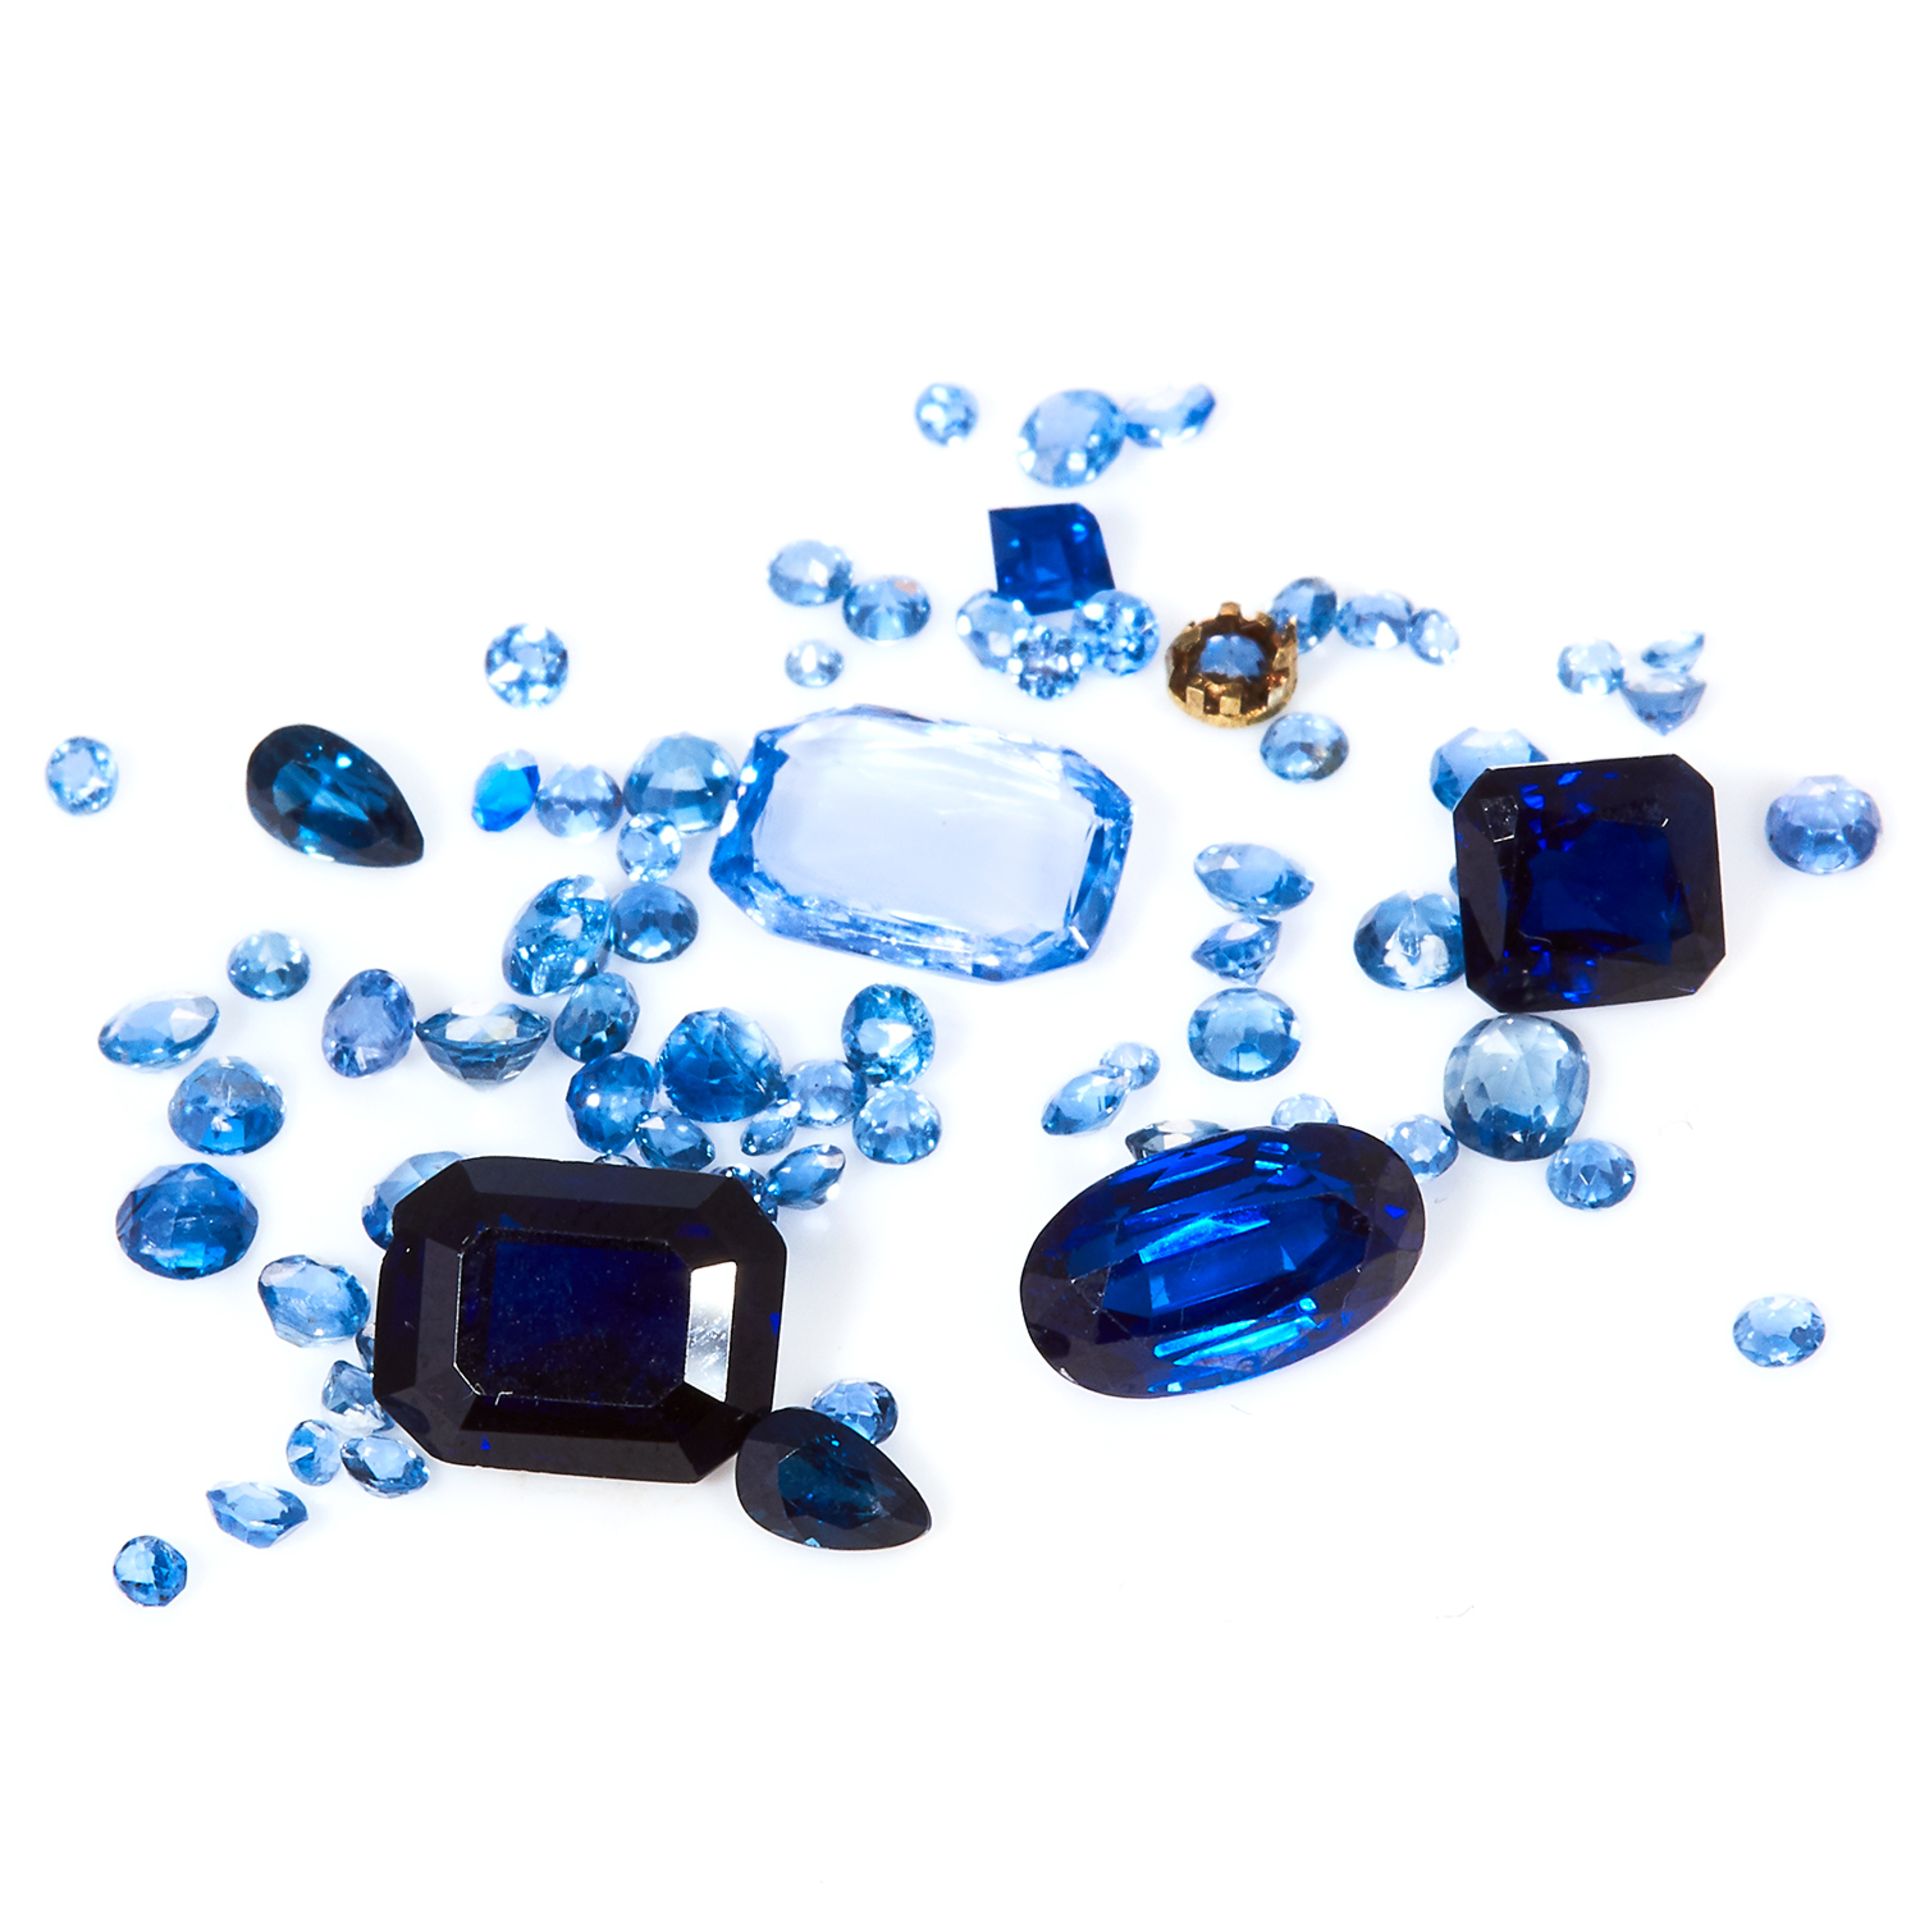 AN 18.0 CARAT PARCEL OF SAPPHIRES various sizes and shapes, three of the largest probably synthetic,